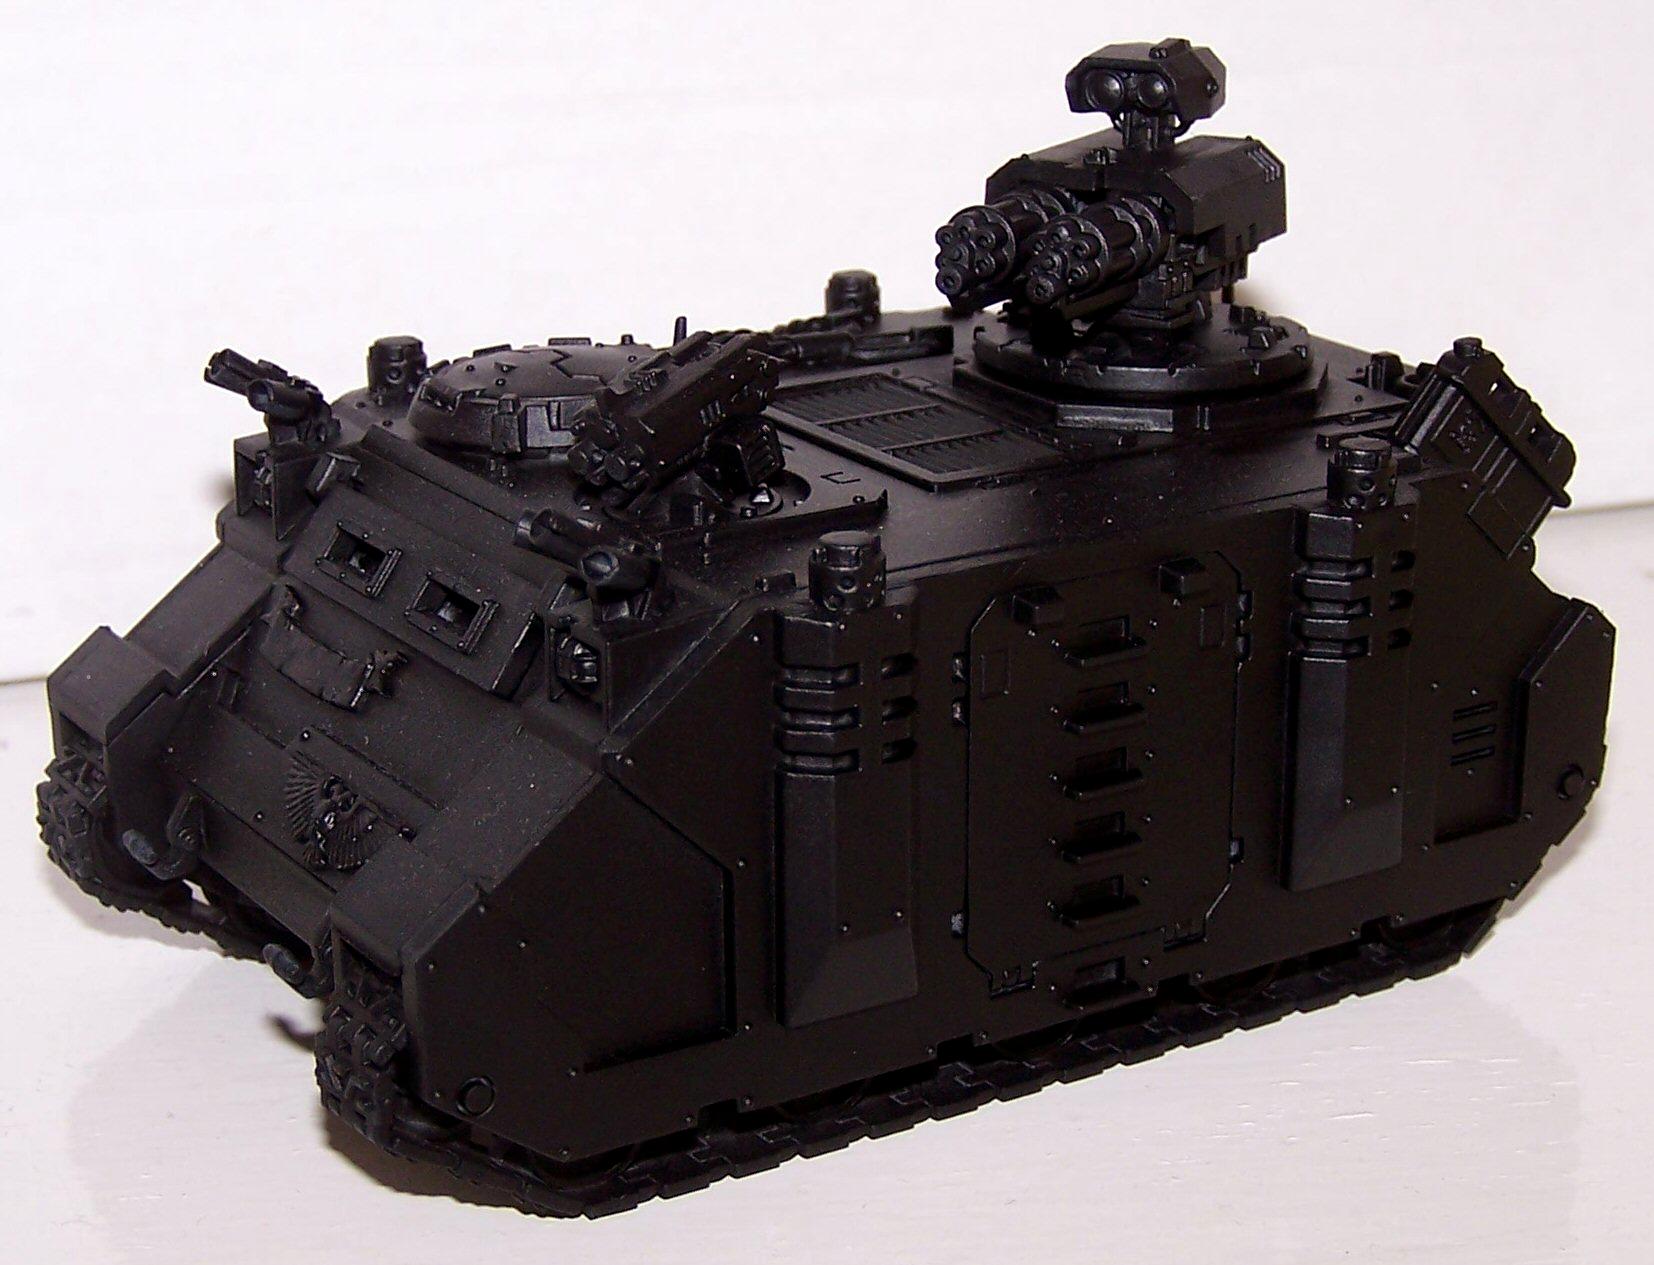 Space Marines, Tank, Razor back with Assault Cannons